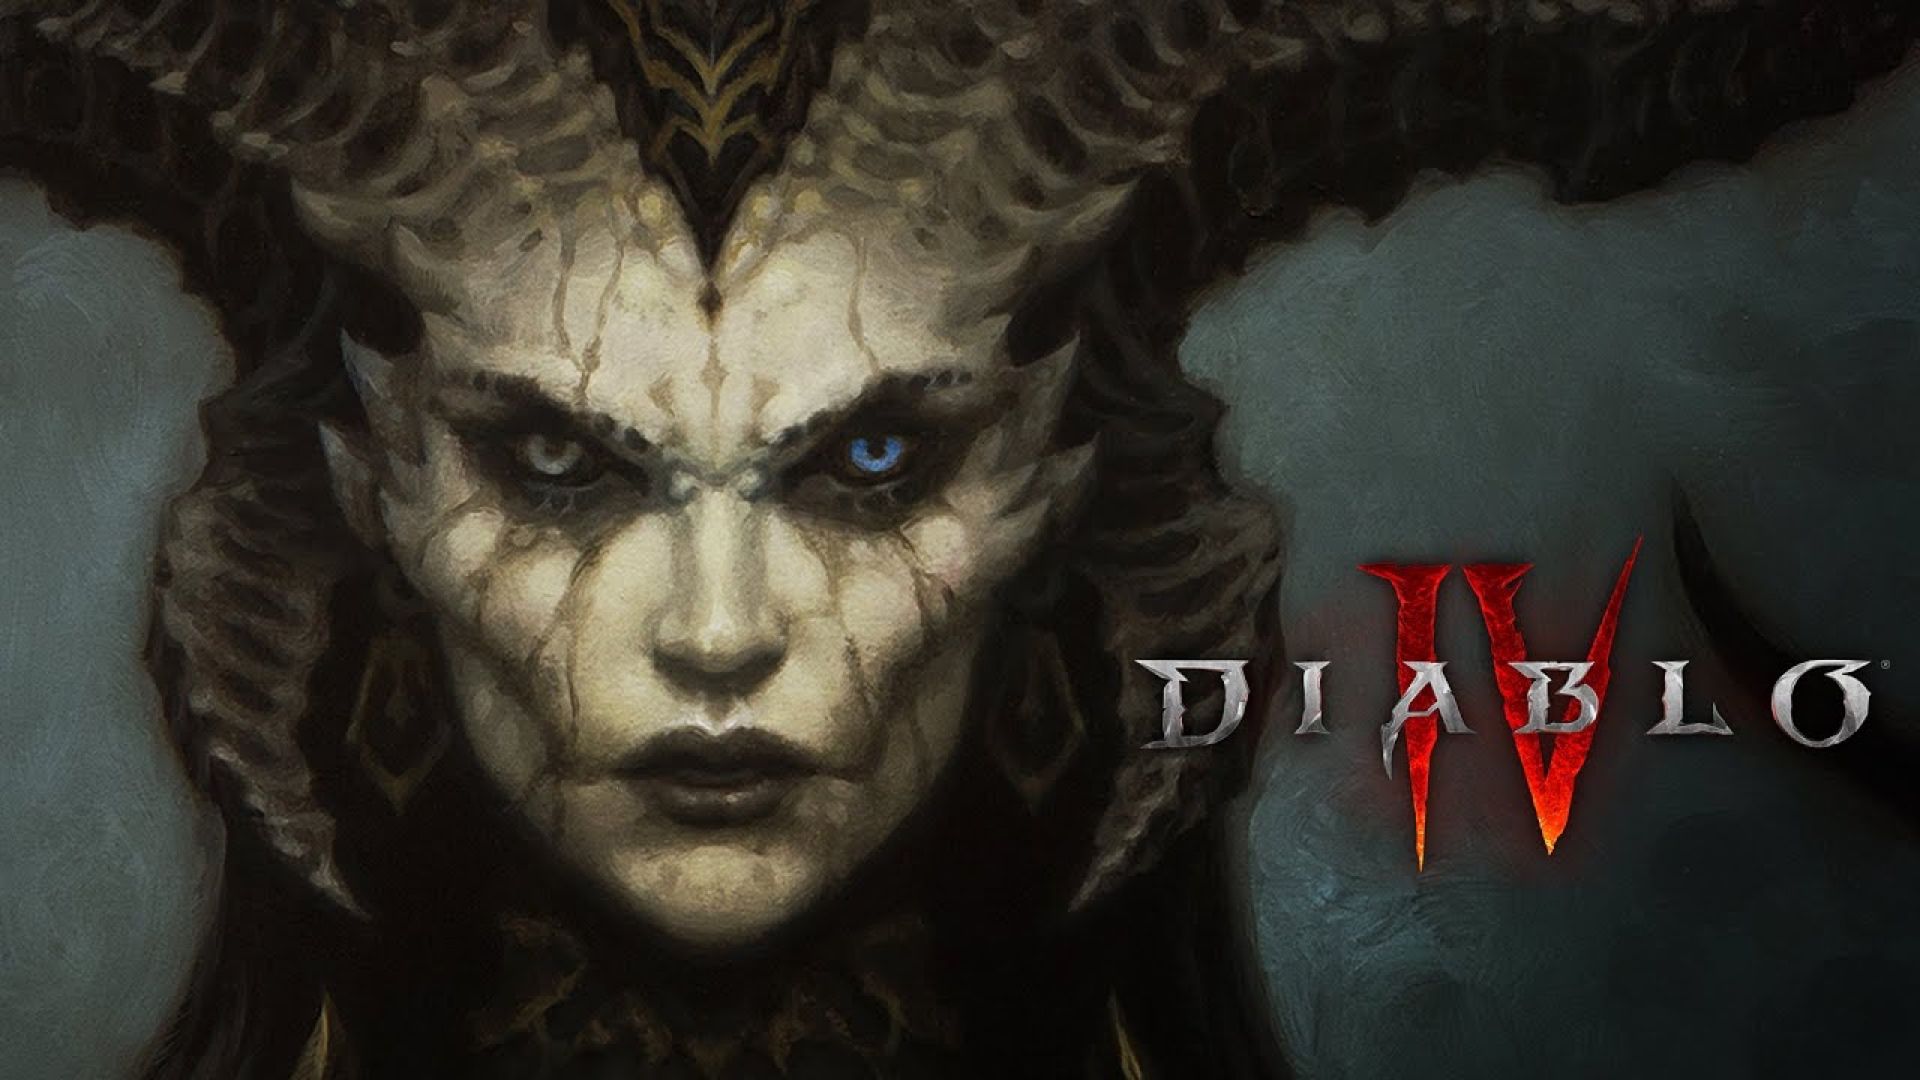 70 Diablo IV HD Wallpapers and Backgrounds